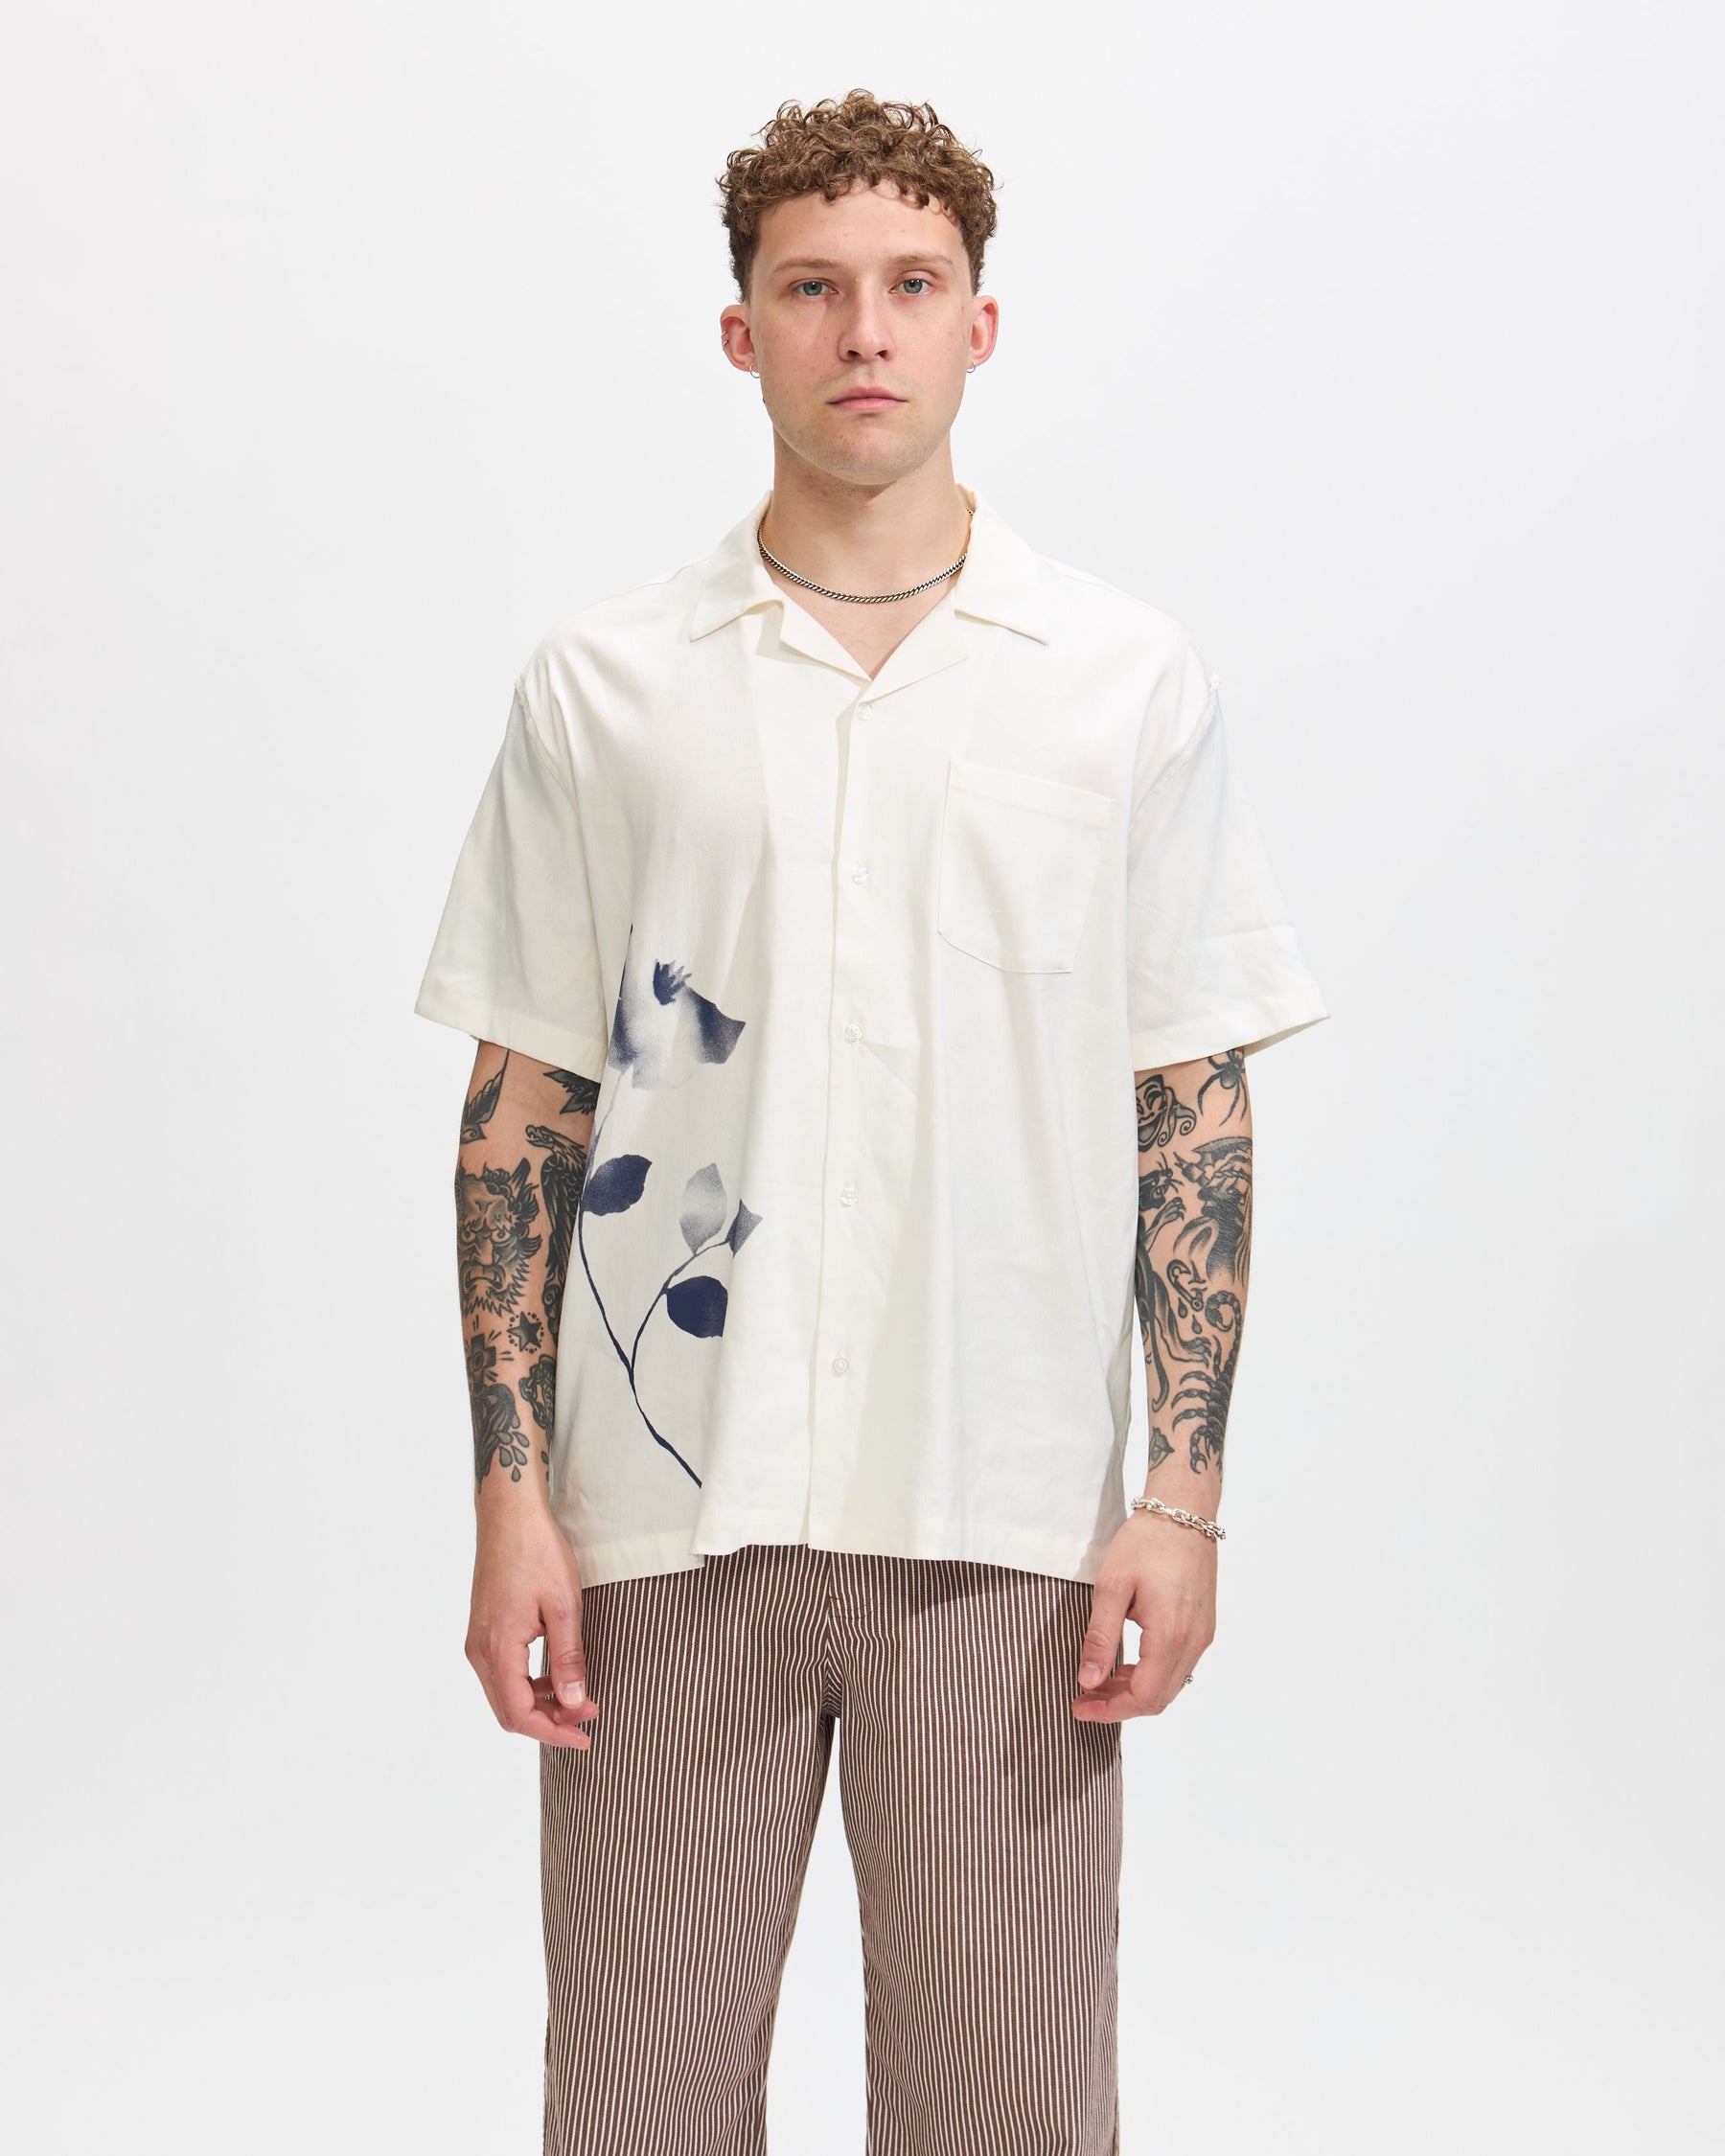 Canty Floral Impressions Short Sleeve Shirt in Ivory